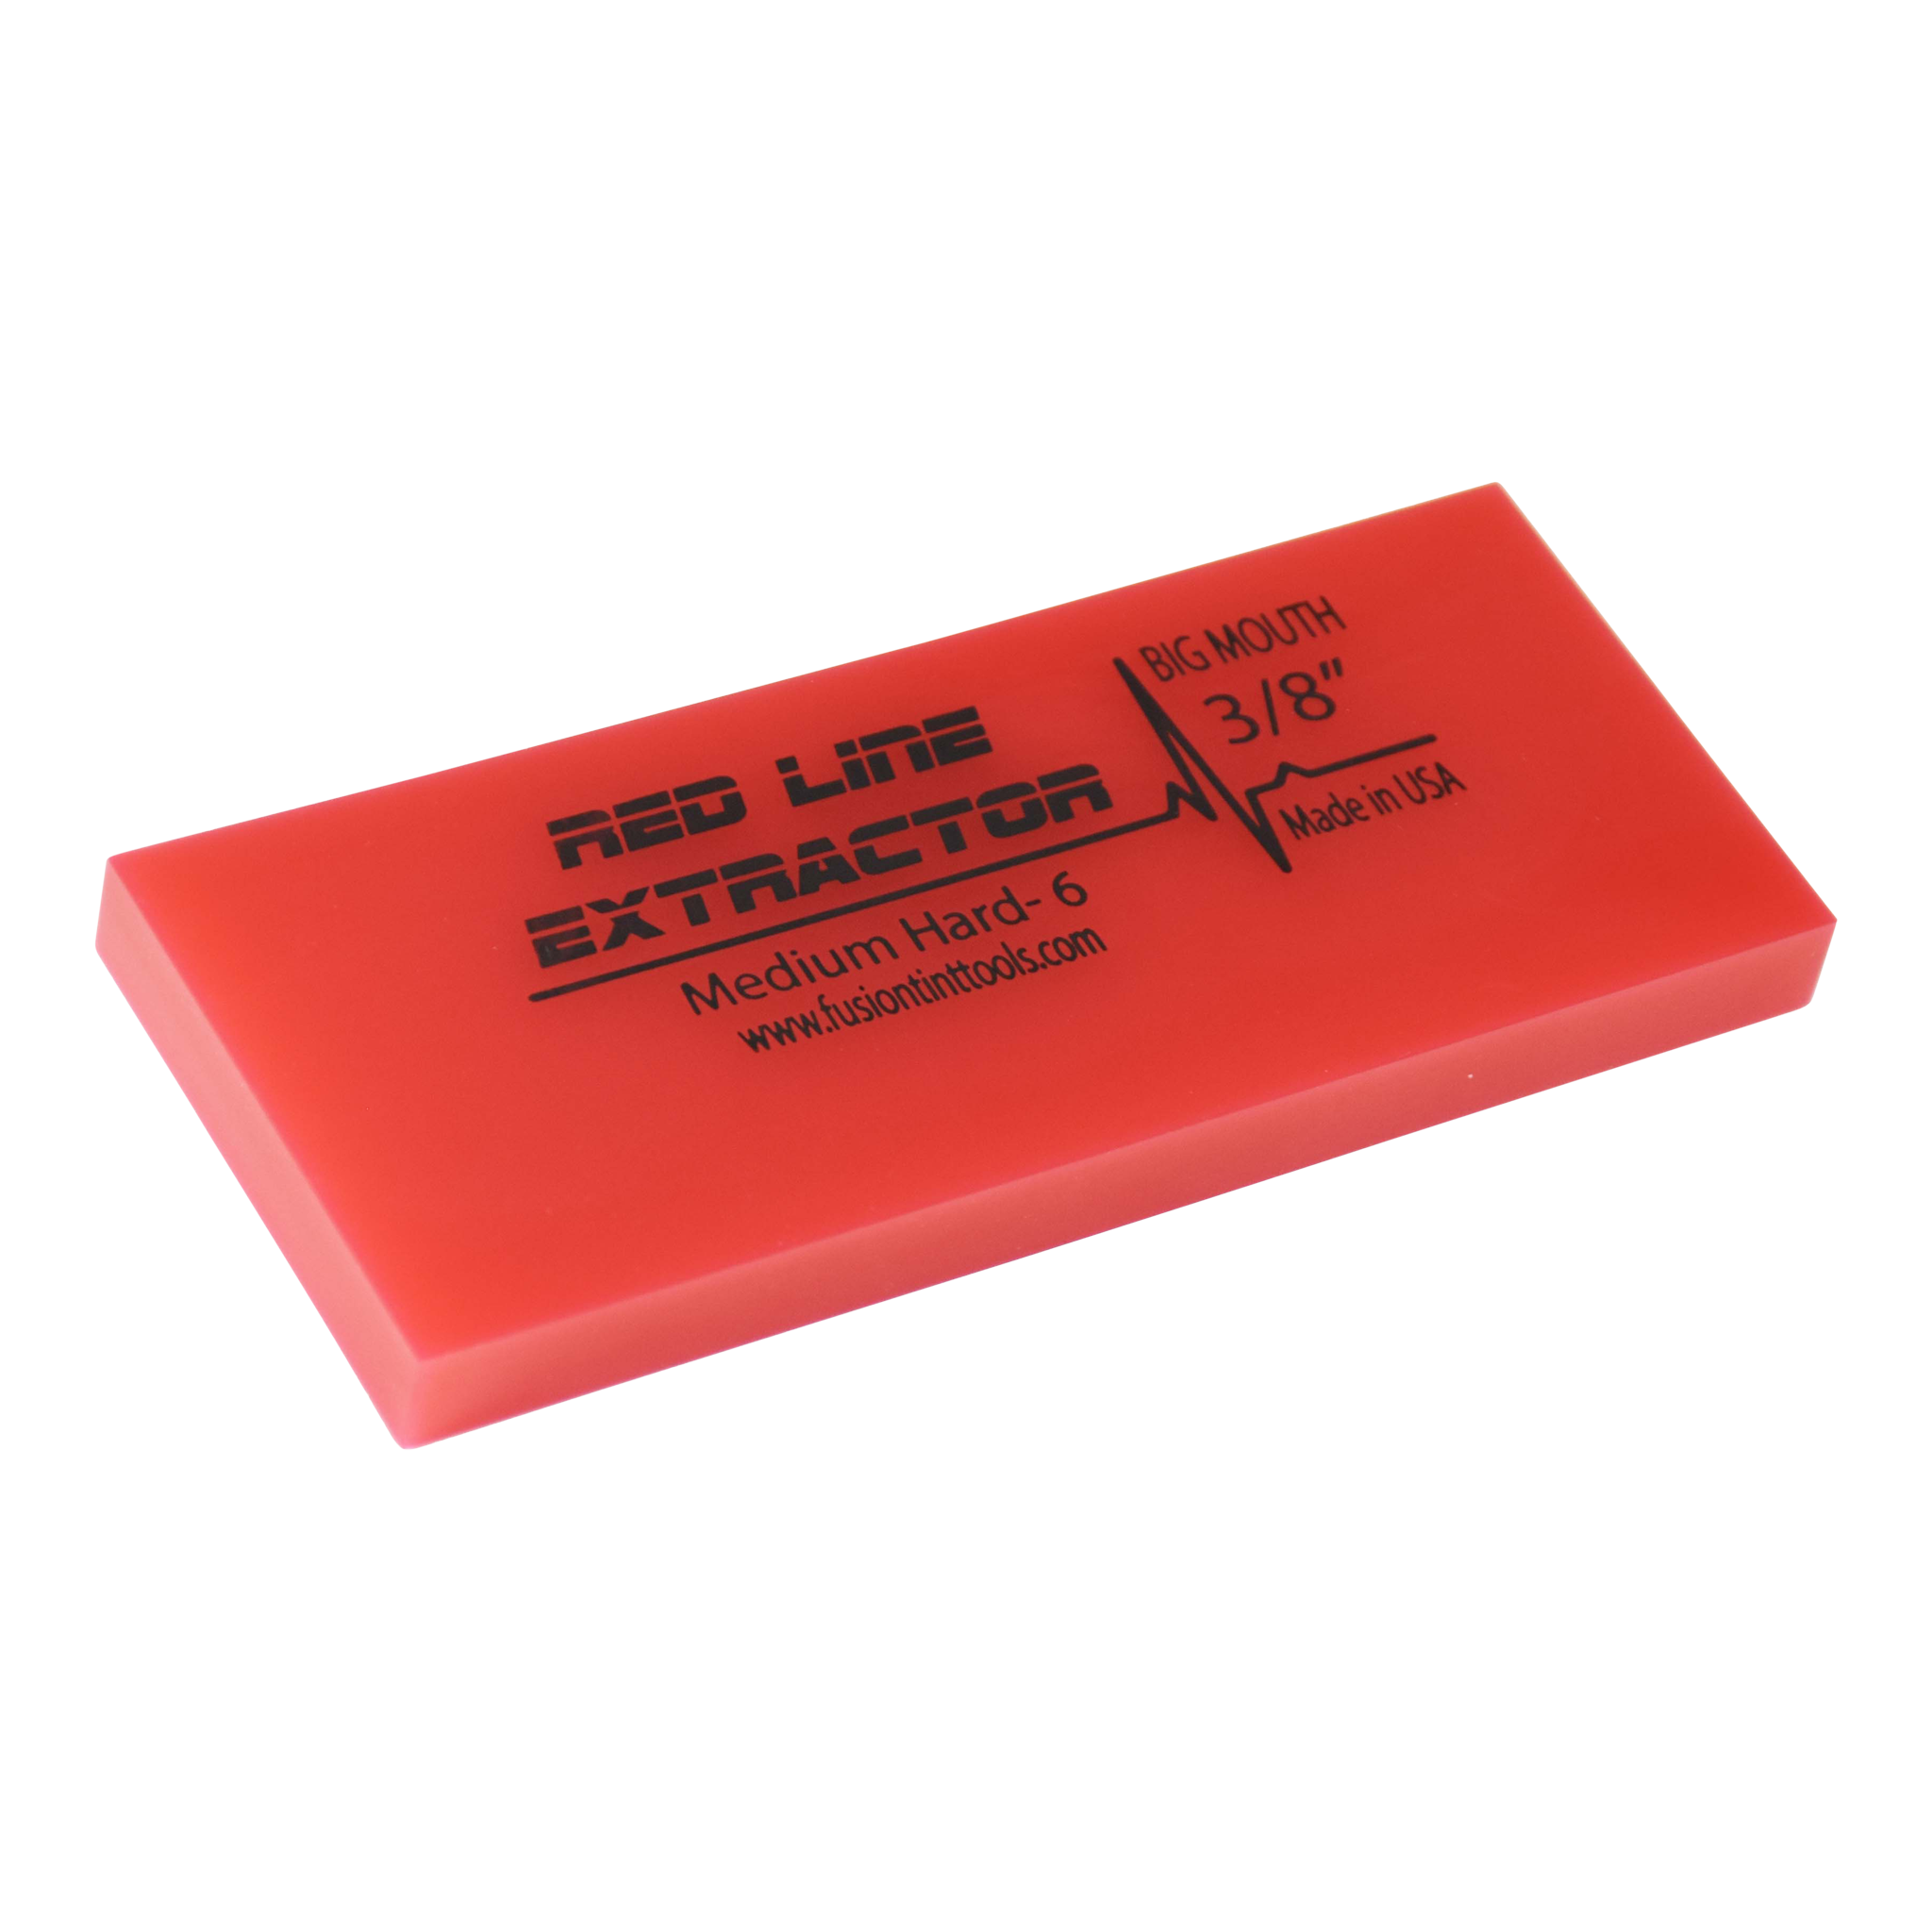 5 RED LINE EXTRACTOR 3/8” THICK NO BEVEL SQUEEGEE BLADE